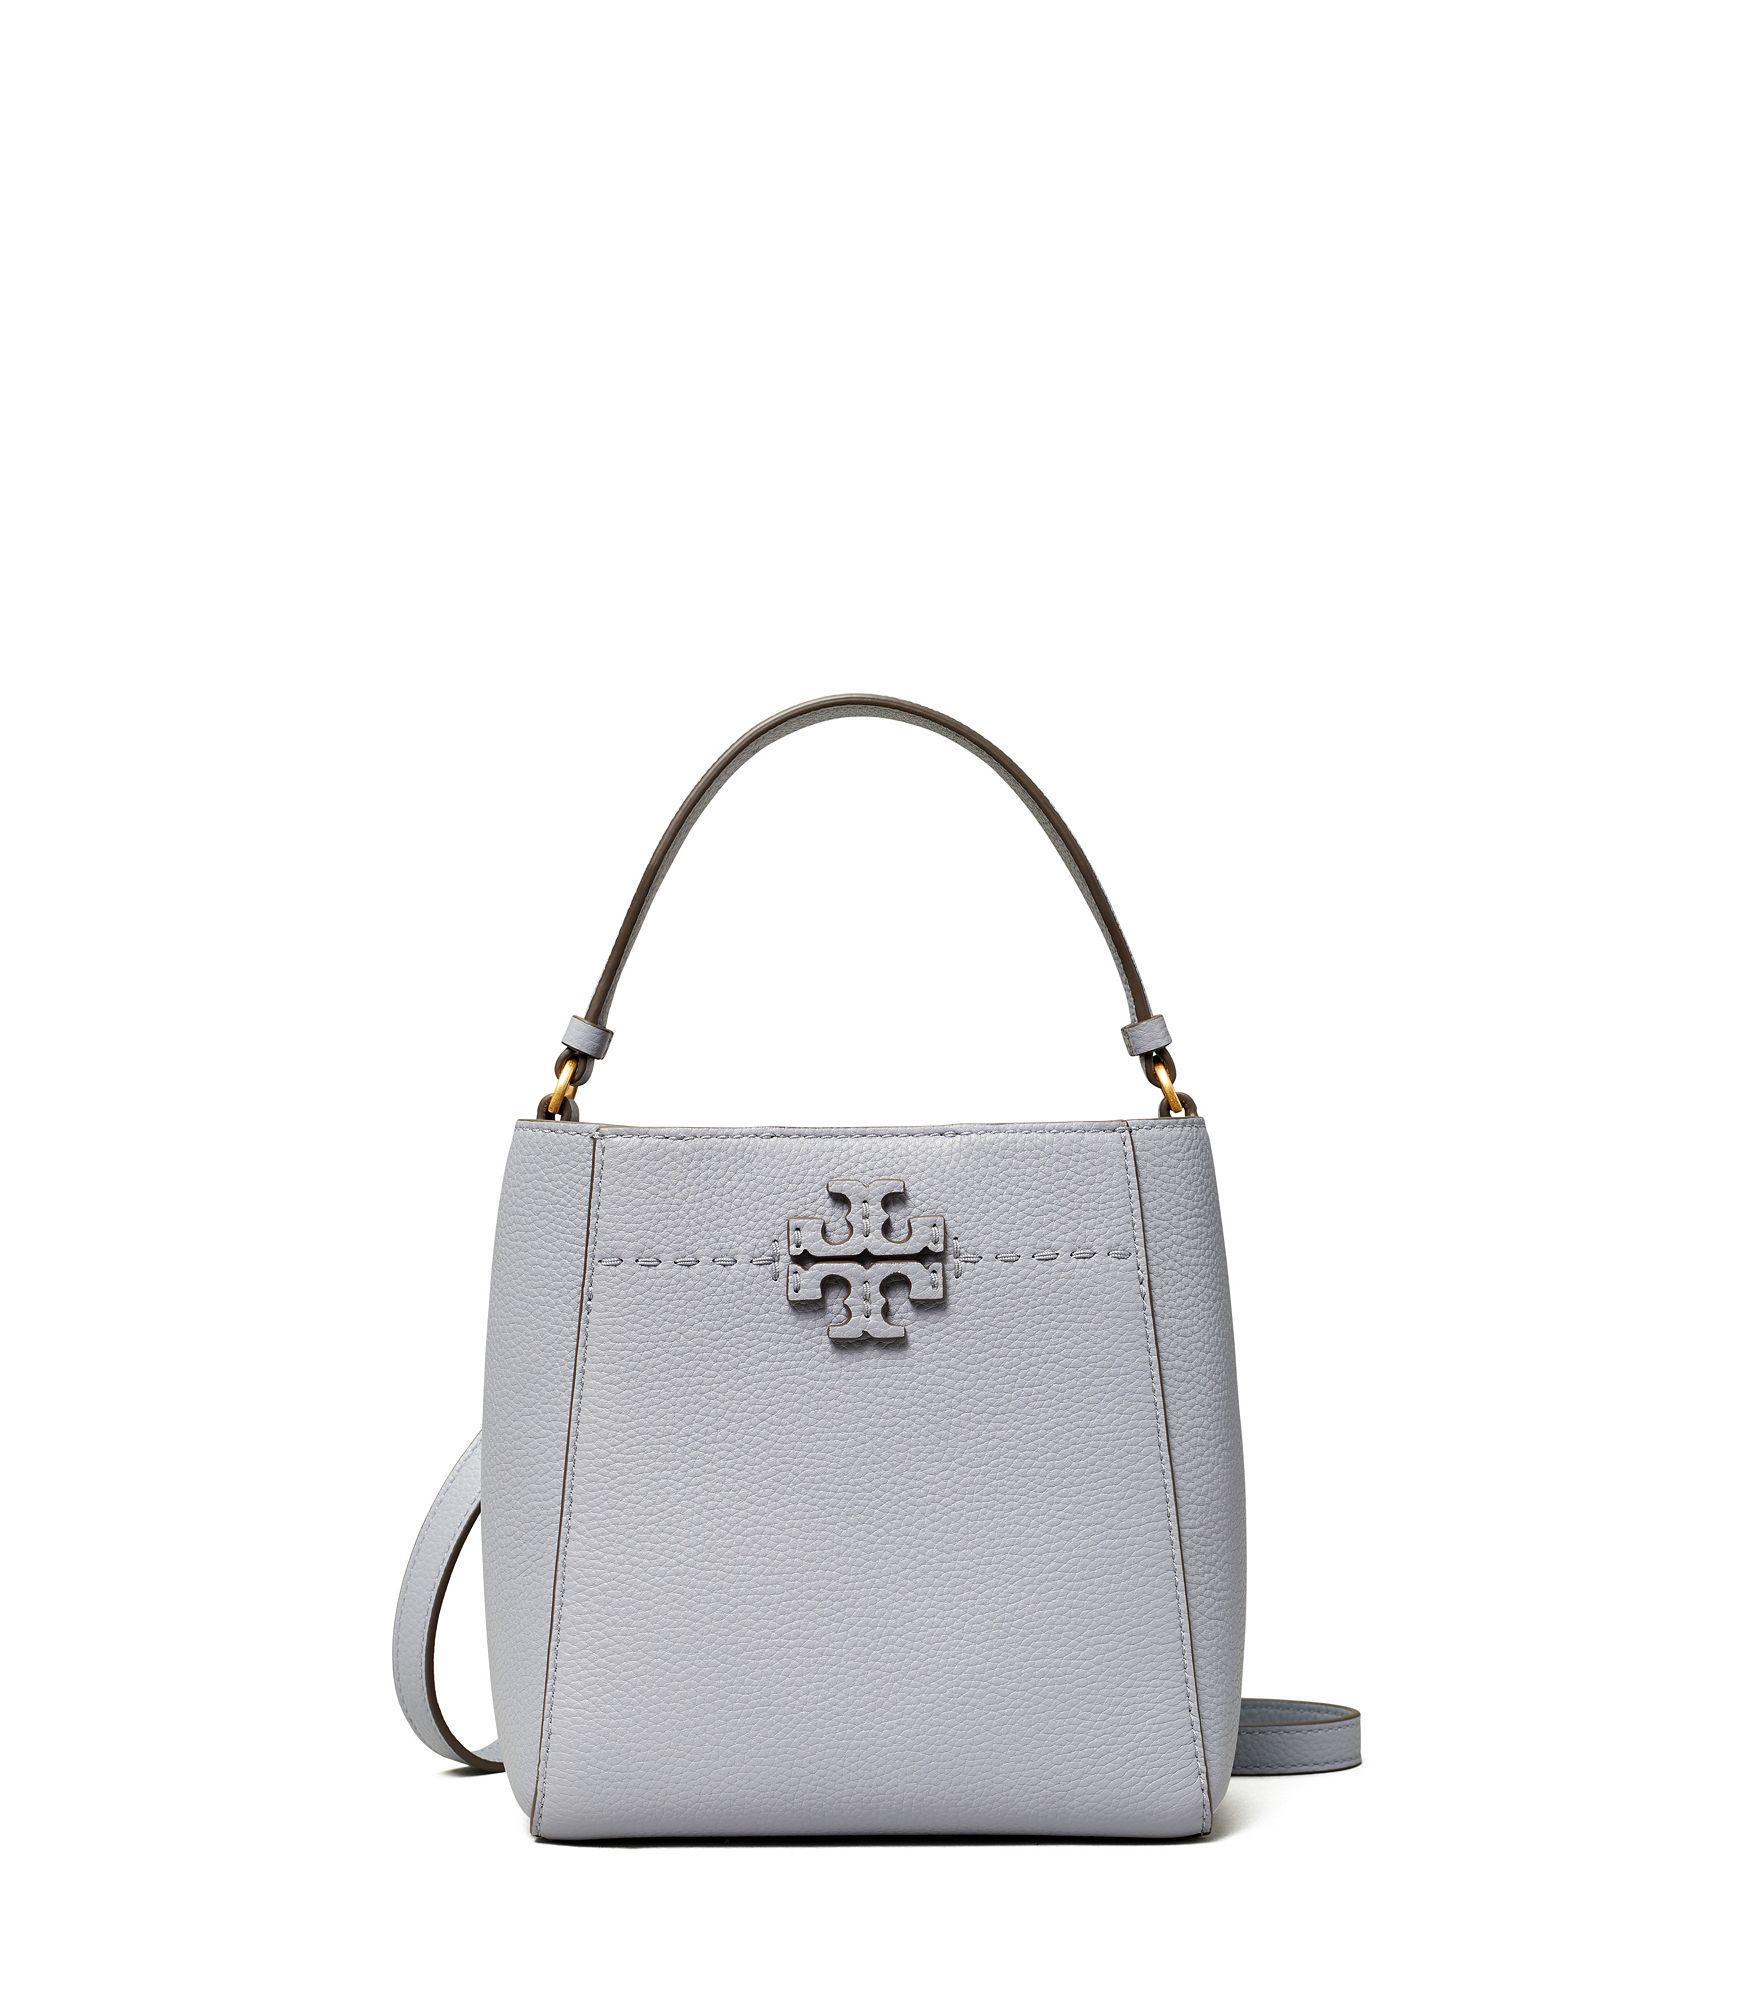 Tory Burch Leather Mcgraw Small Bucket Bag - Lyst